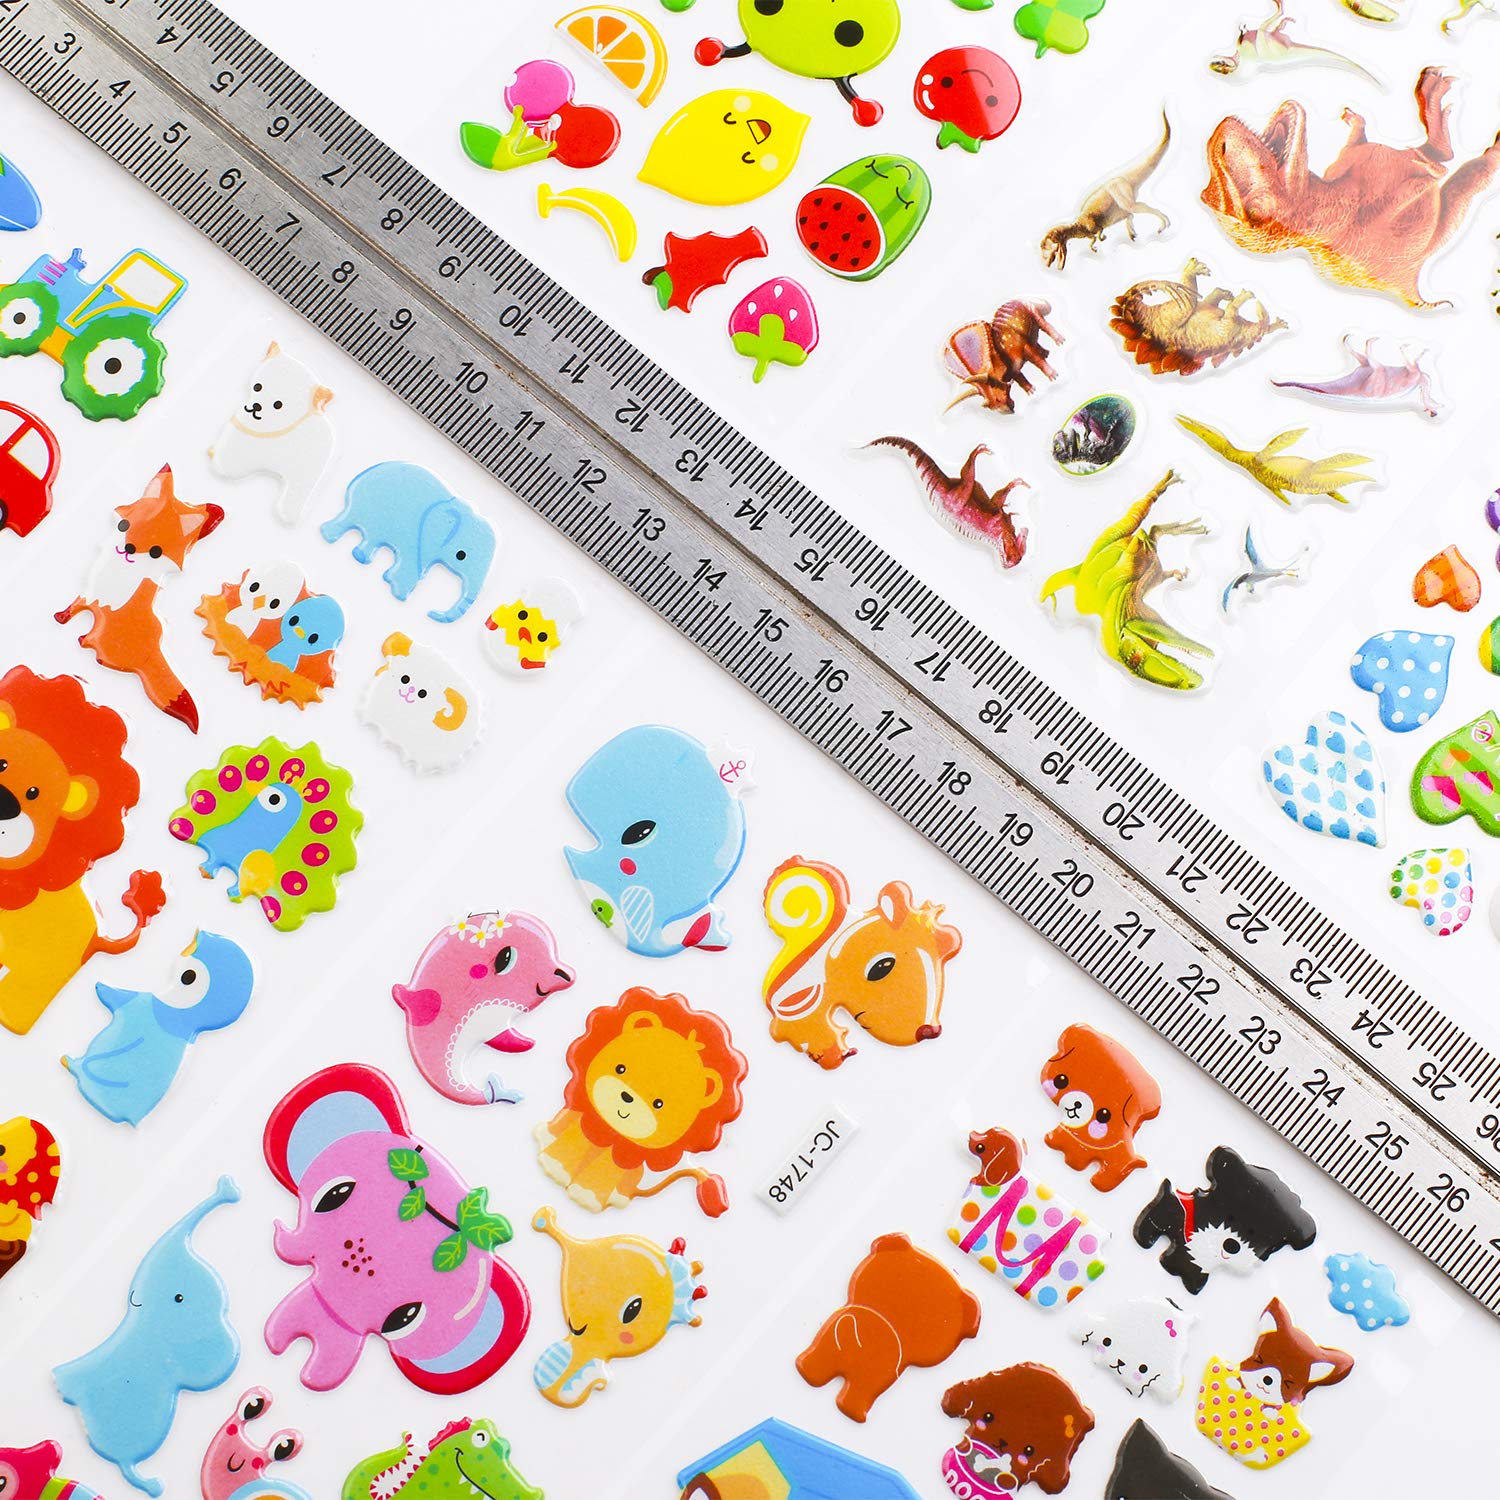 3D Stickers for Kids Toddlers 550+ Vivid Puffy Kids Stickers 24 Different Sheets, Colored 3D Stickers for Boys Girls Teachers, Reward, Craft Scrapbooking